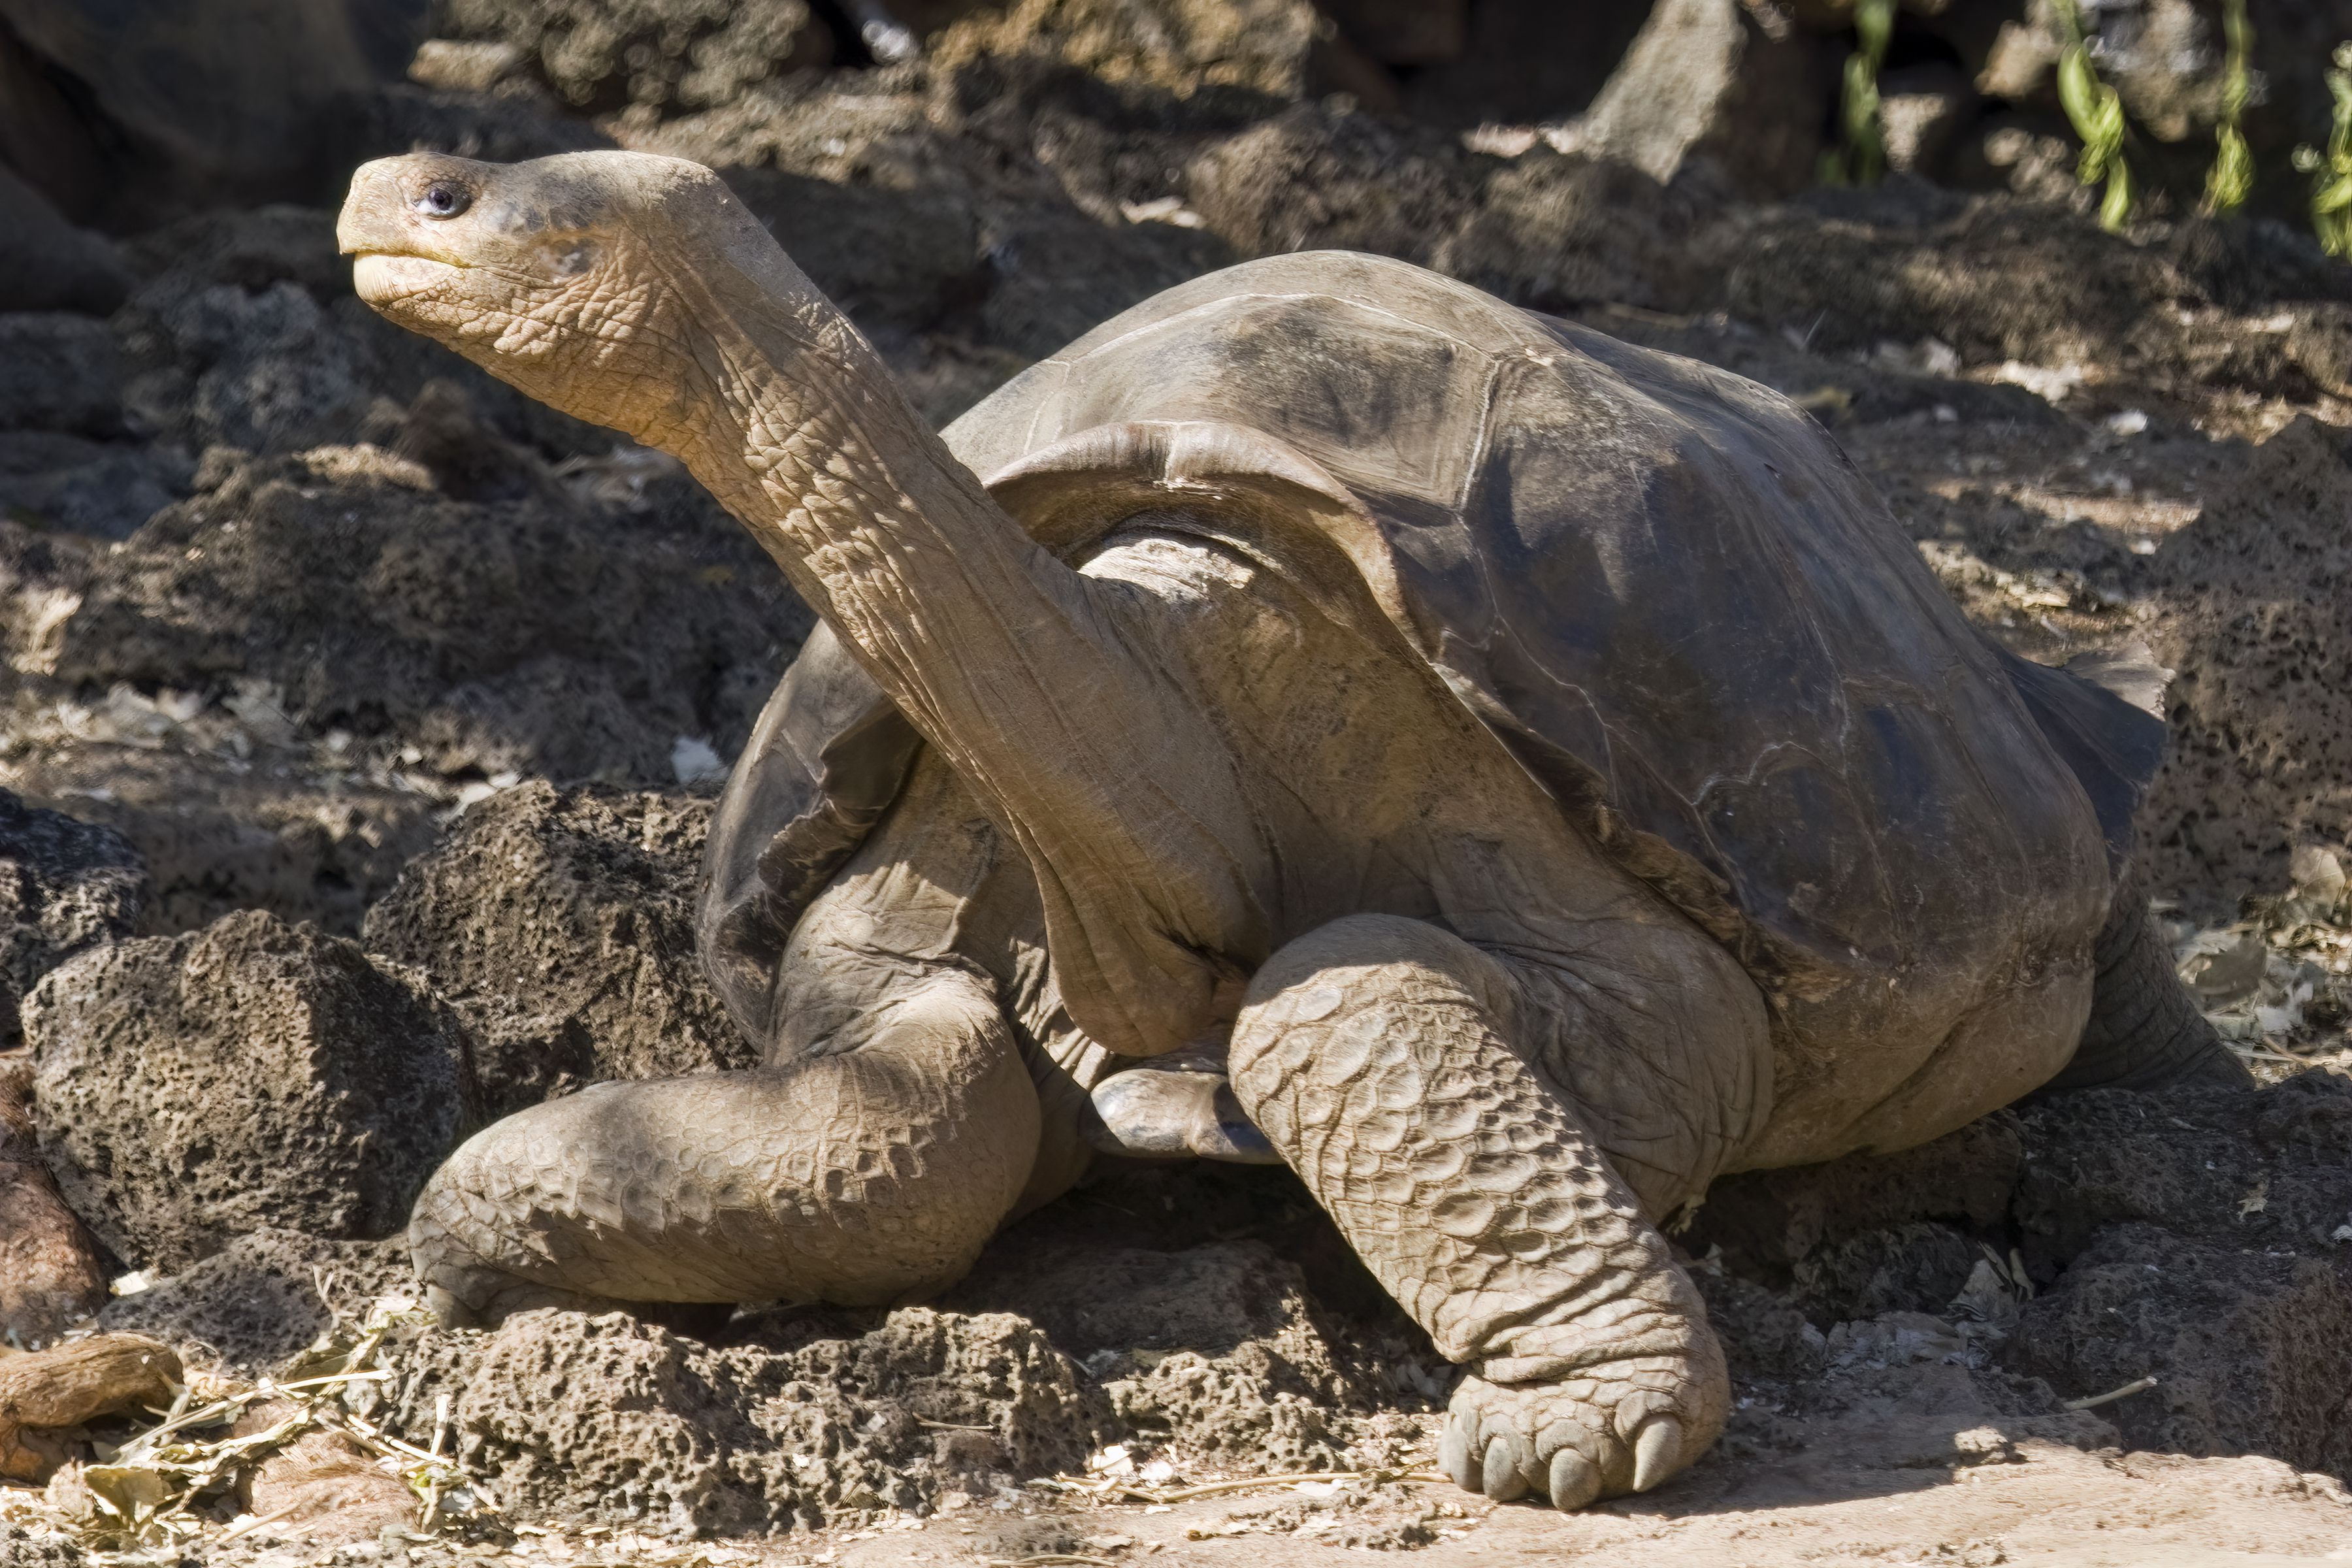 <p>Native to the island of Pinta in the northern Galapagos Archipelago, the last known individual of this species, <a href="https://www.galapagos.org/about_galapagos/lonesome-george/">Lonesome George</a>, died in 2012. Over-harvesting by sailors and the introduction of non-native species is thought to have <a href="https://www.galapagos.org/about_galapagos/the-islands/pinta-island/">decimated their population</a>. Invasive species like goats also destroyed their natural habitat by scavenging on vegetation and leaving little food behind for these giant tortoises. </p>